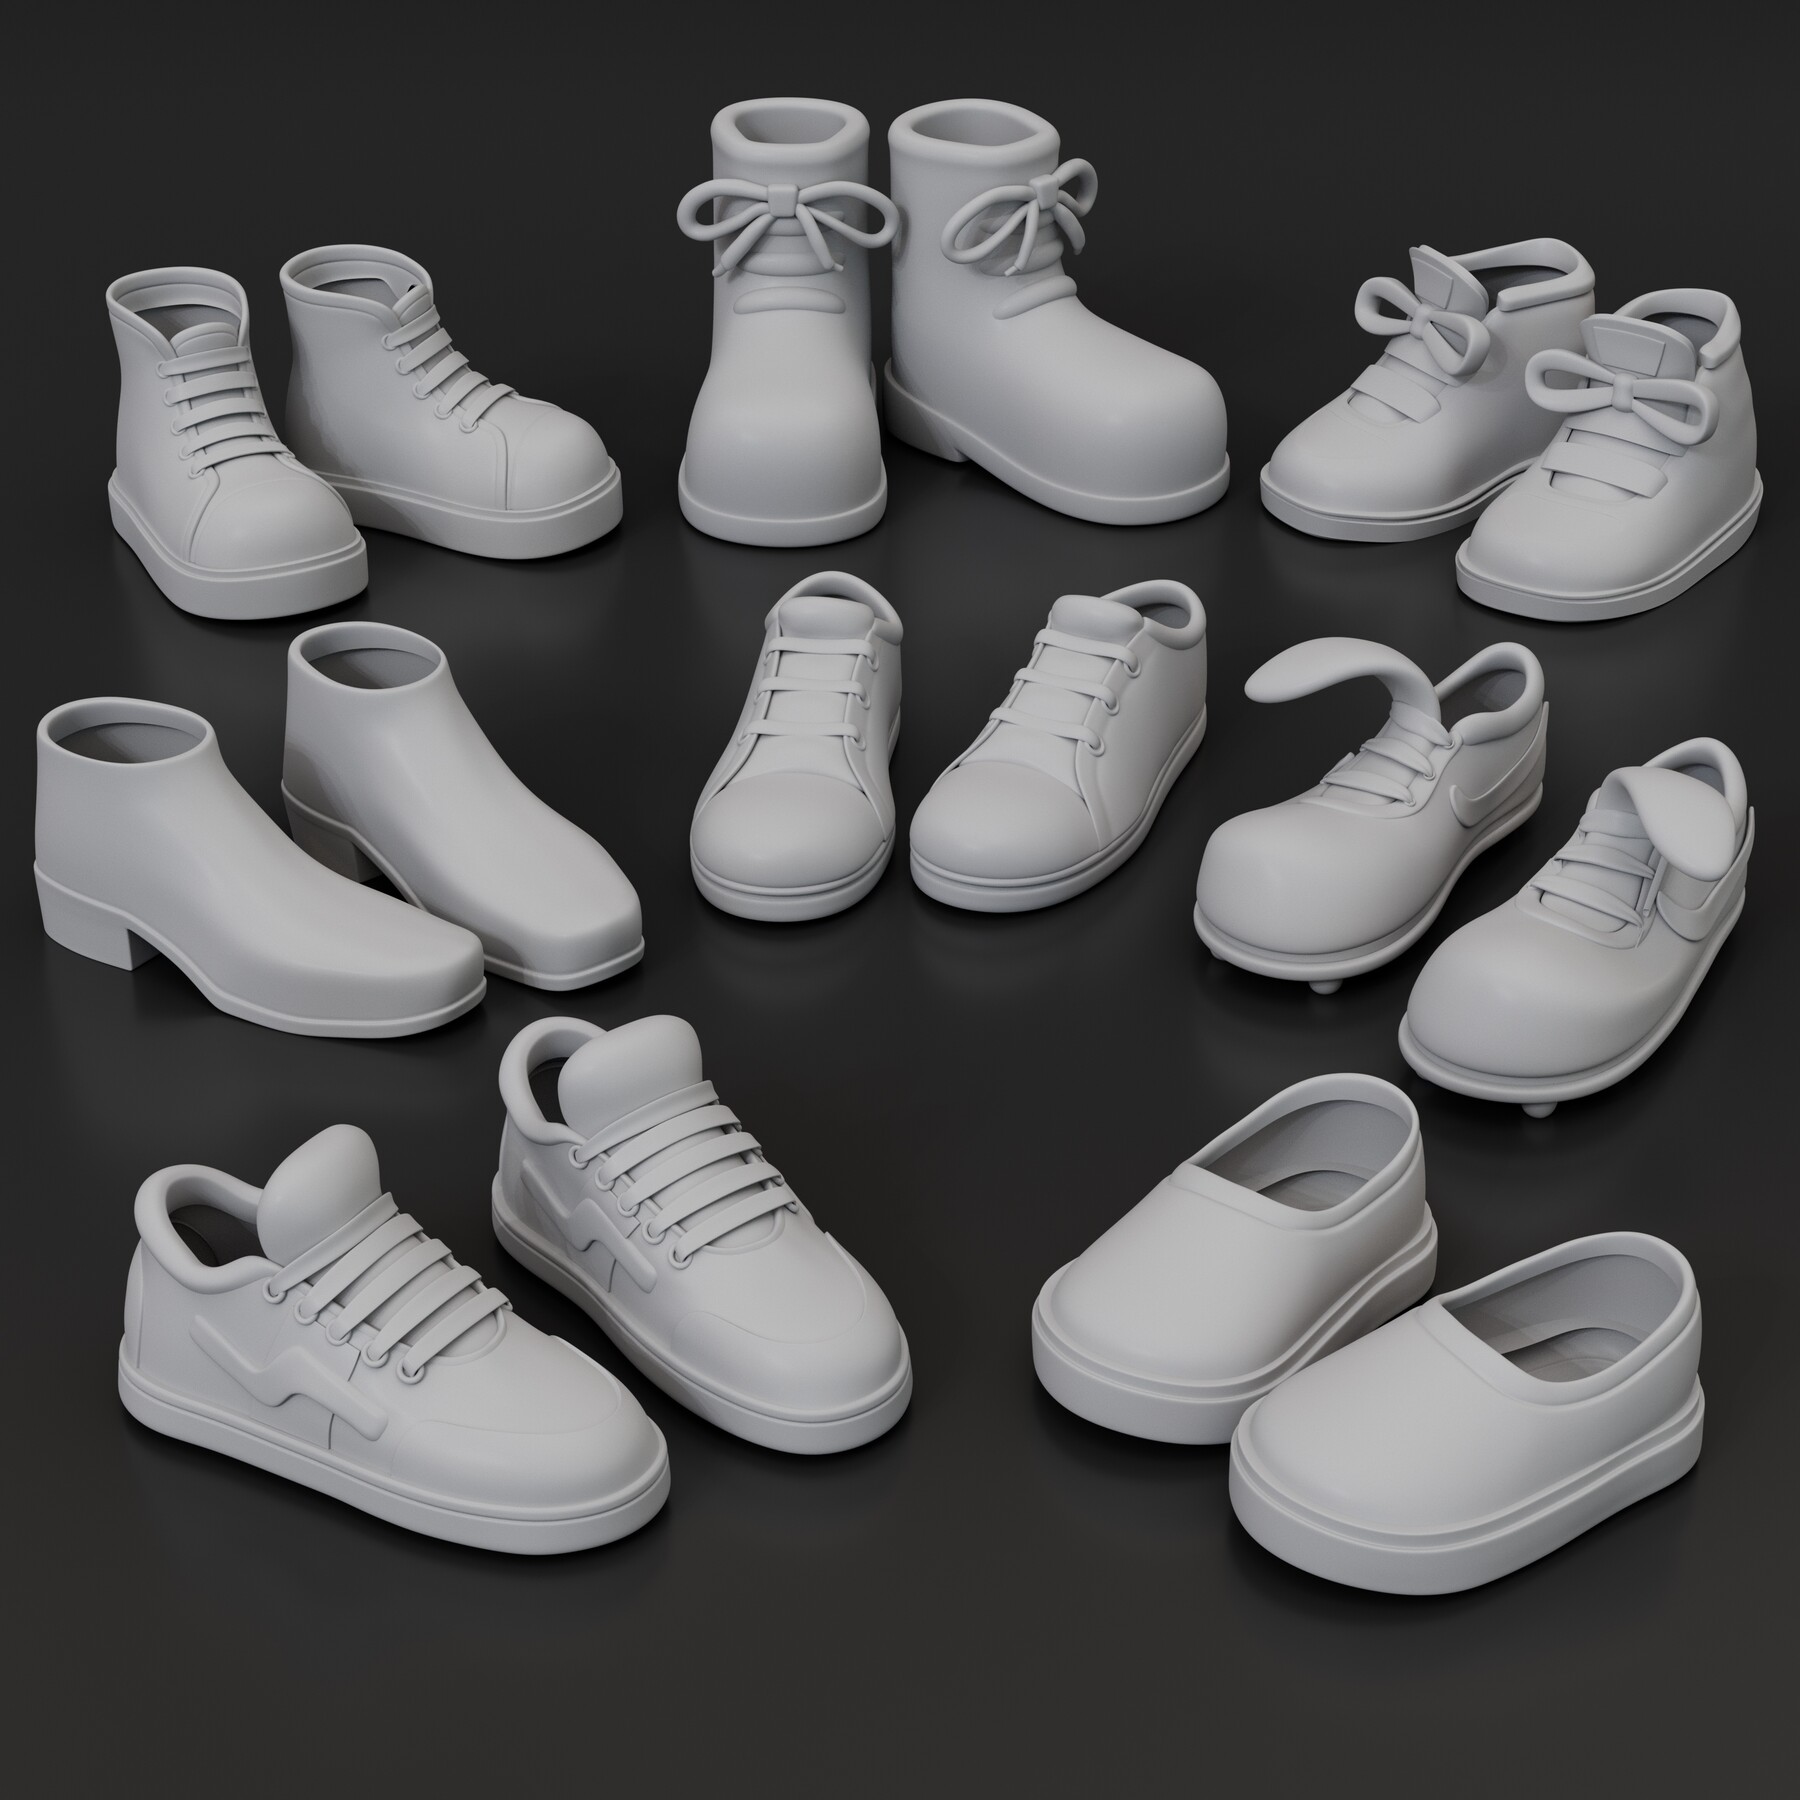 ArtStation - Pack Shoes Cartoon | Resources